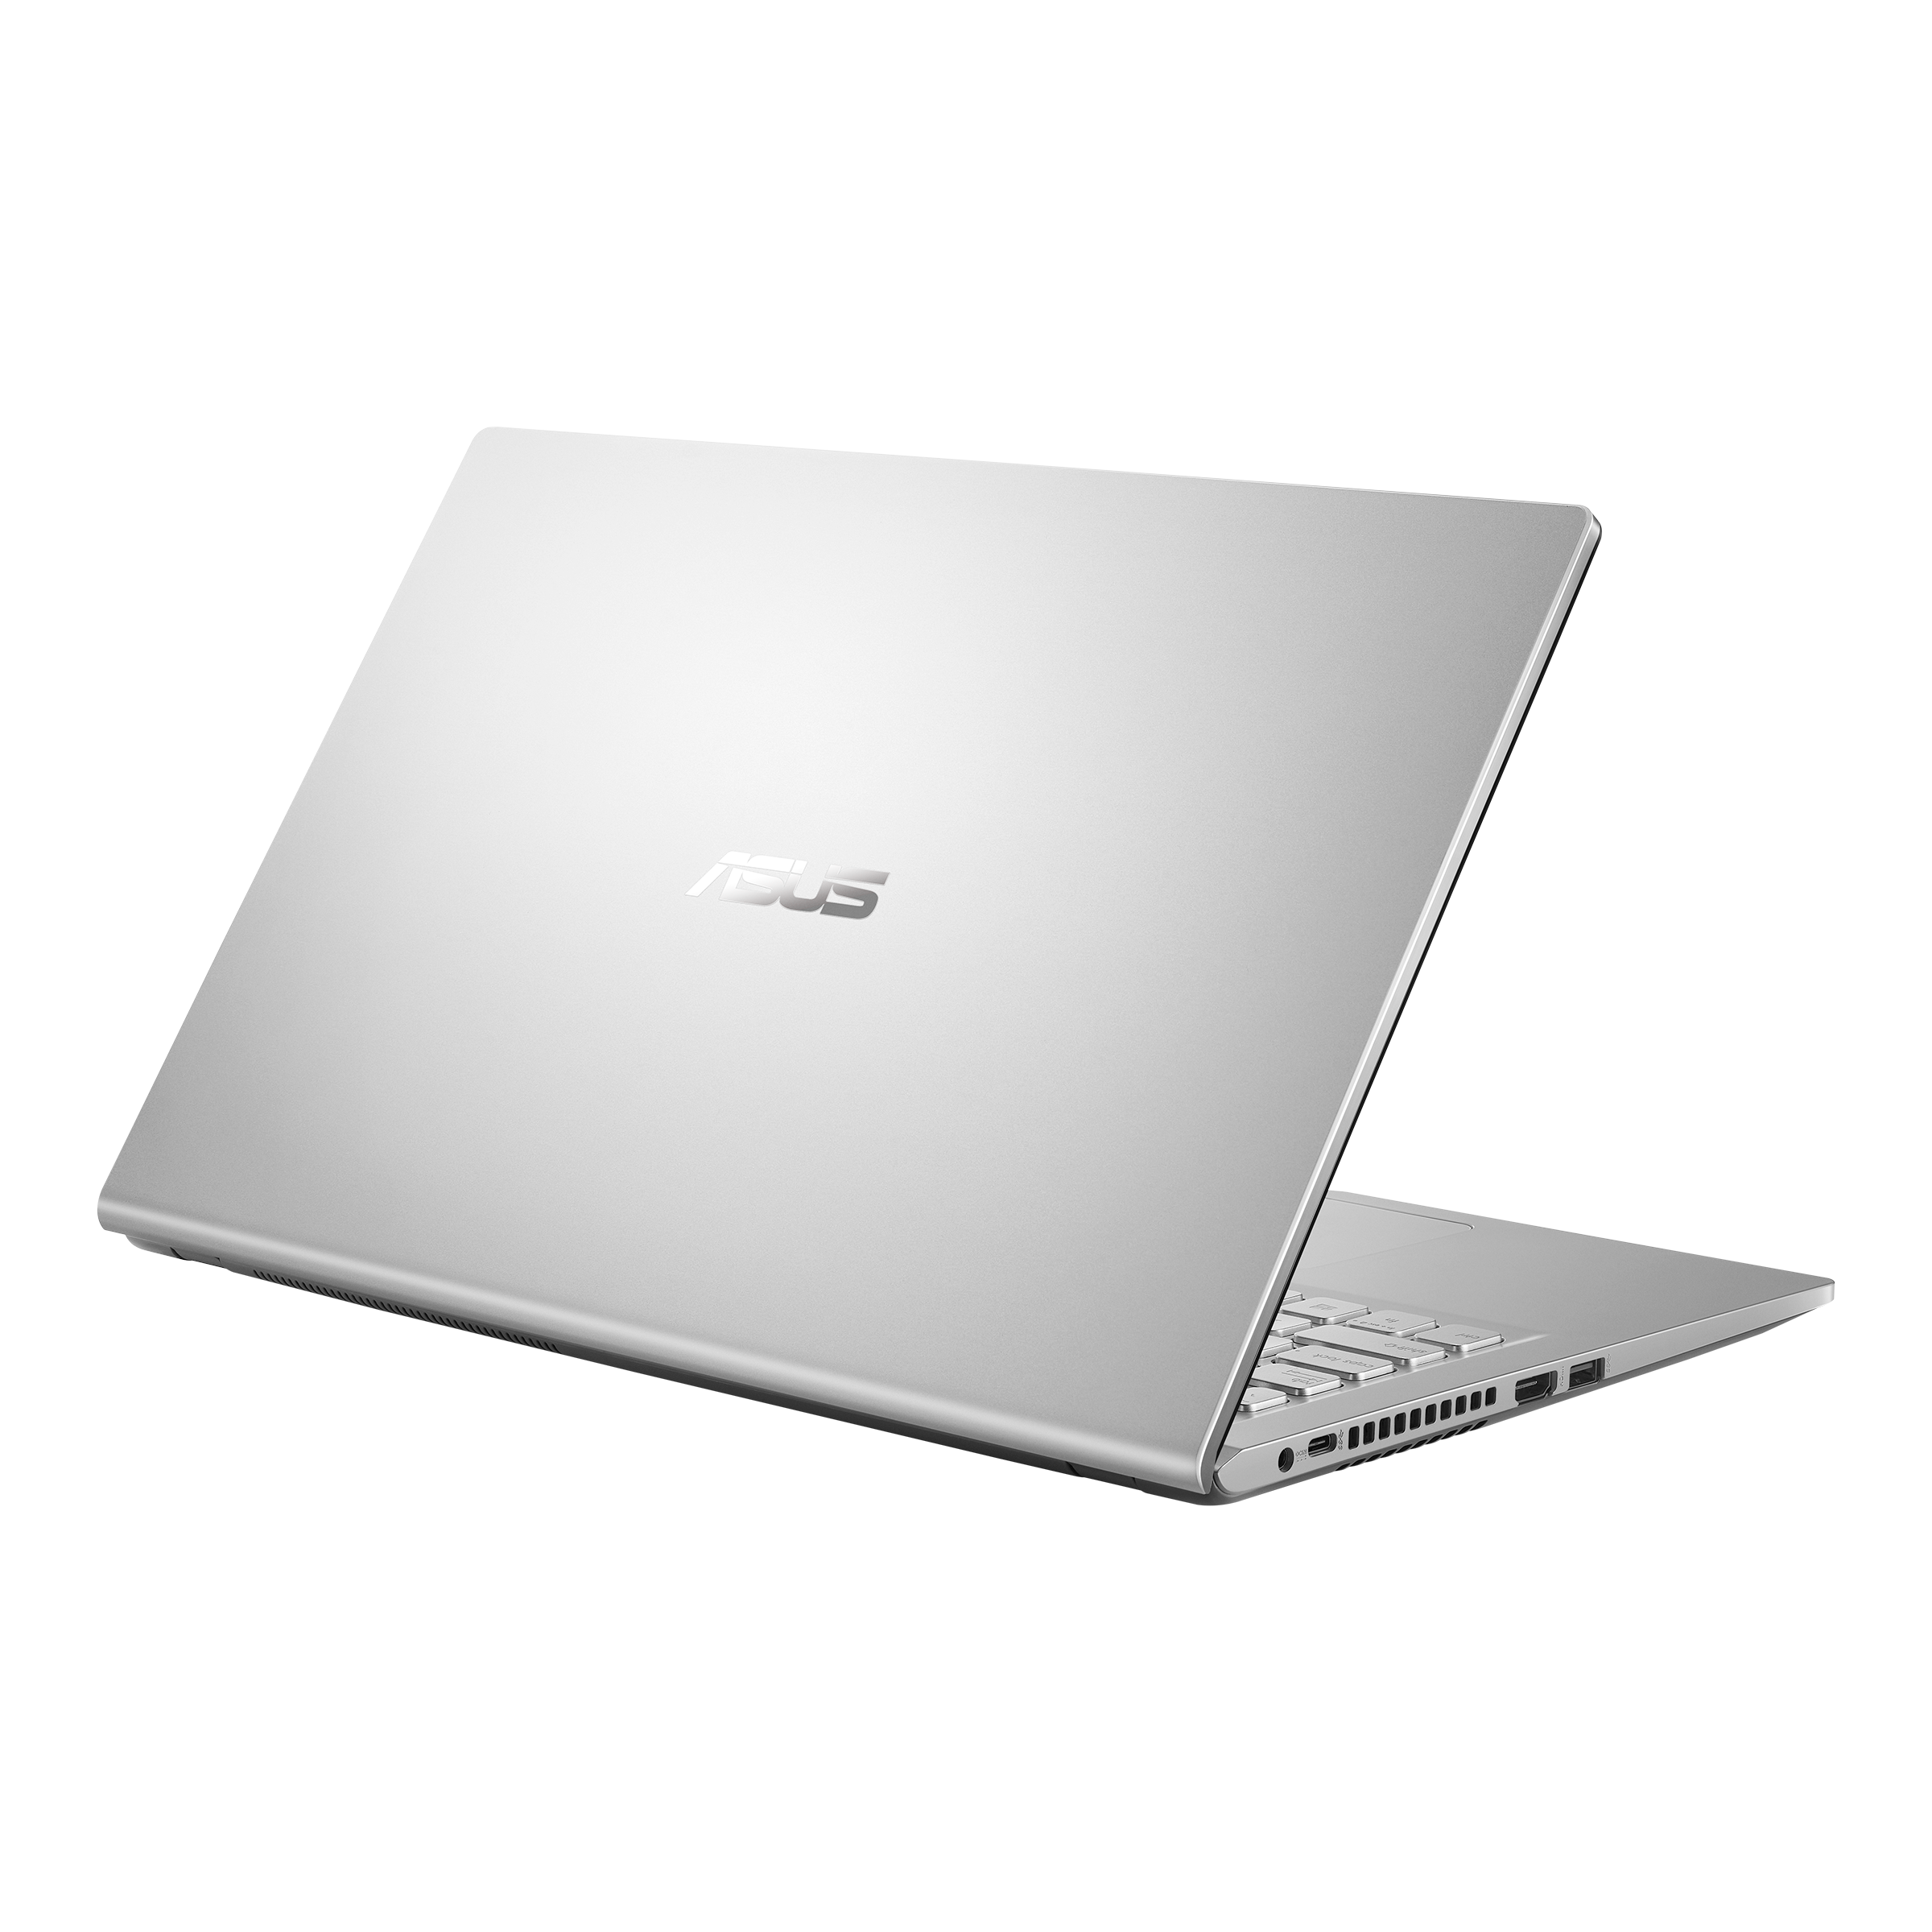 ASUS X515 (11th Gen Intel)｜Laptops For Home｜ASUS USA